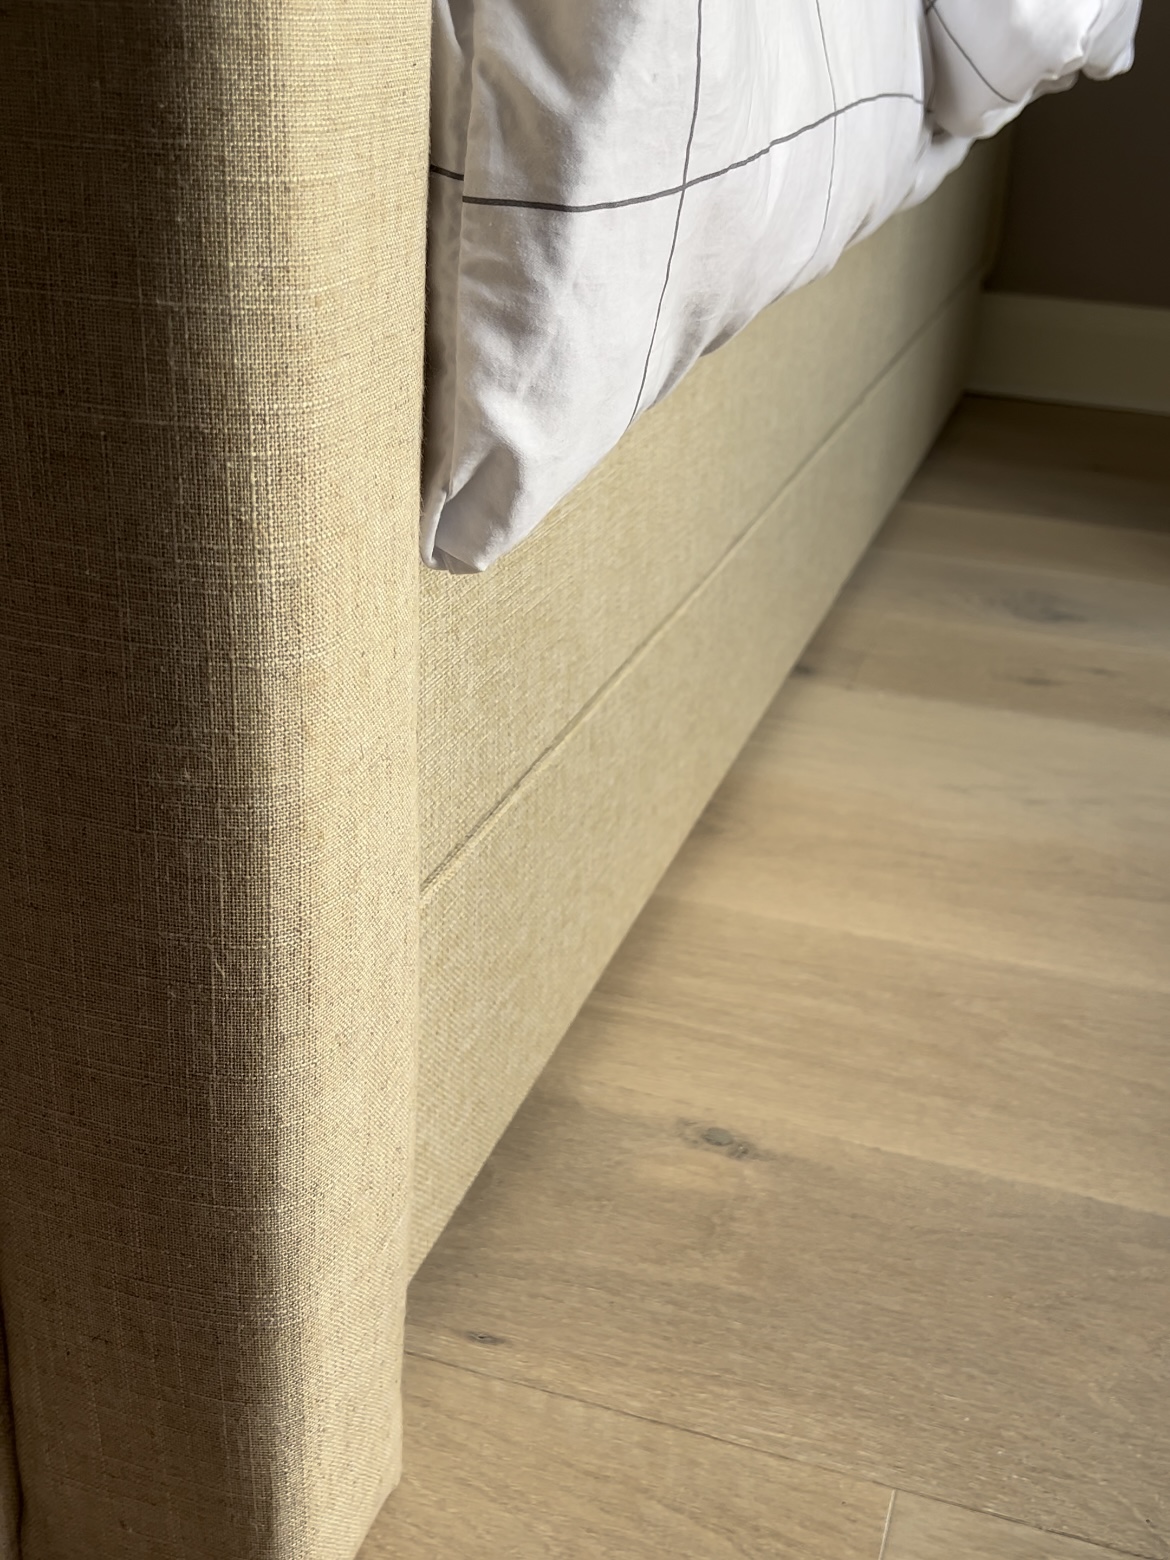 Edge of fully upholstered bed.